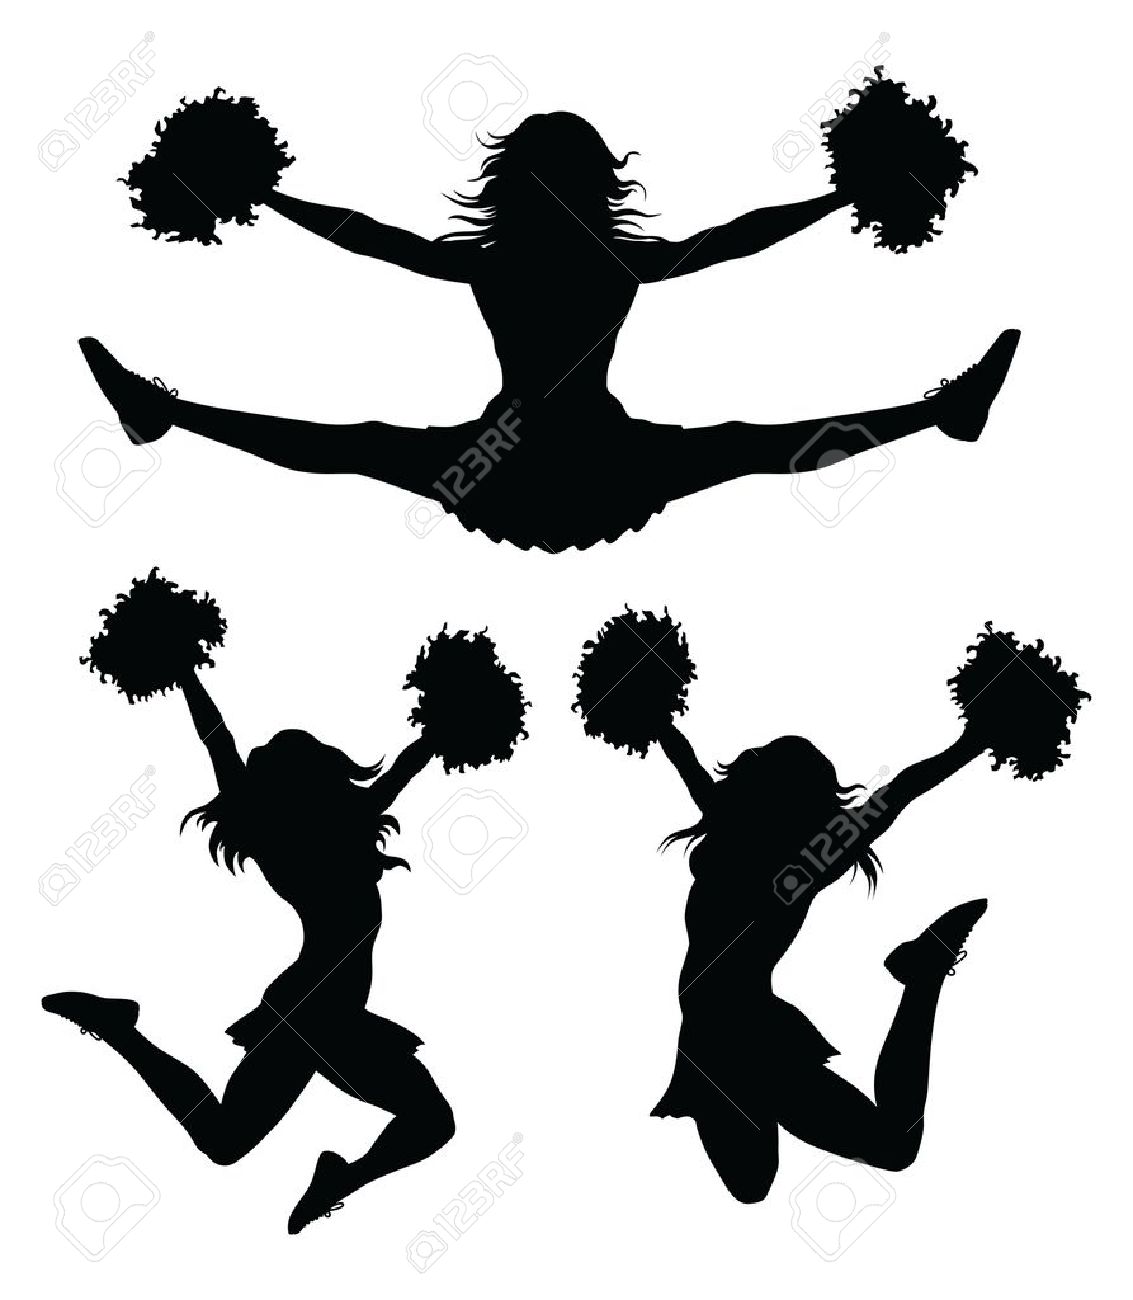 Cheer Jumps Silhouette Clipart